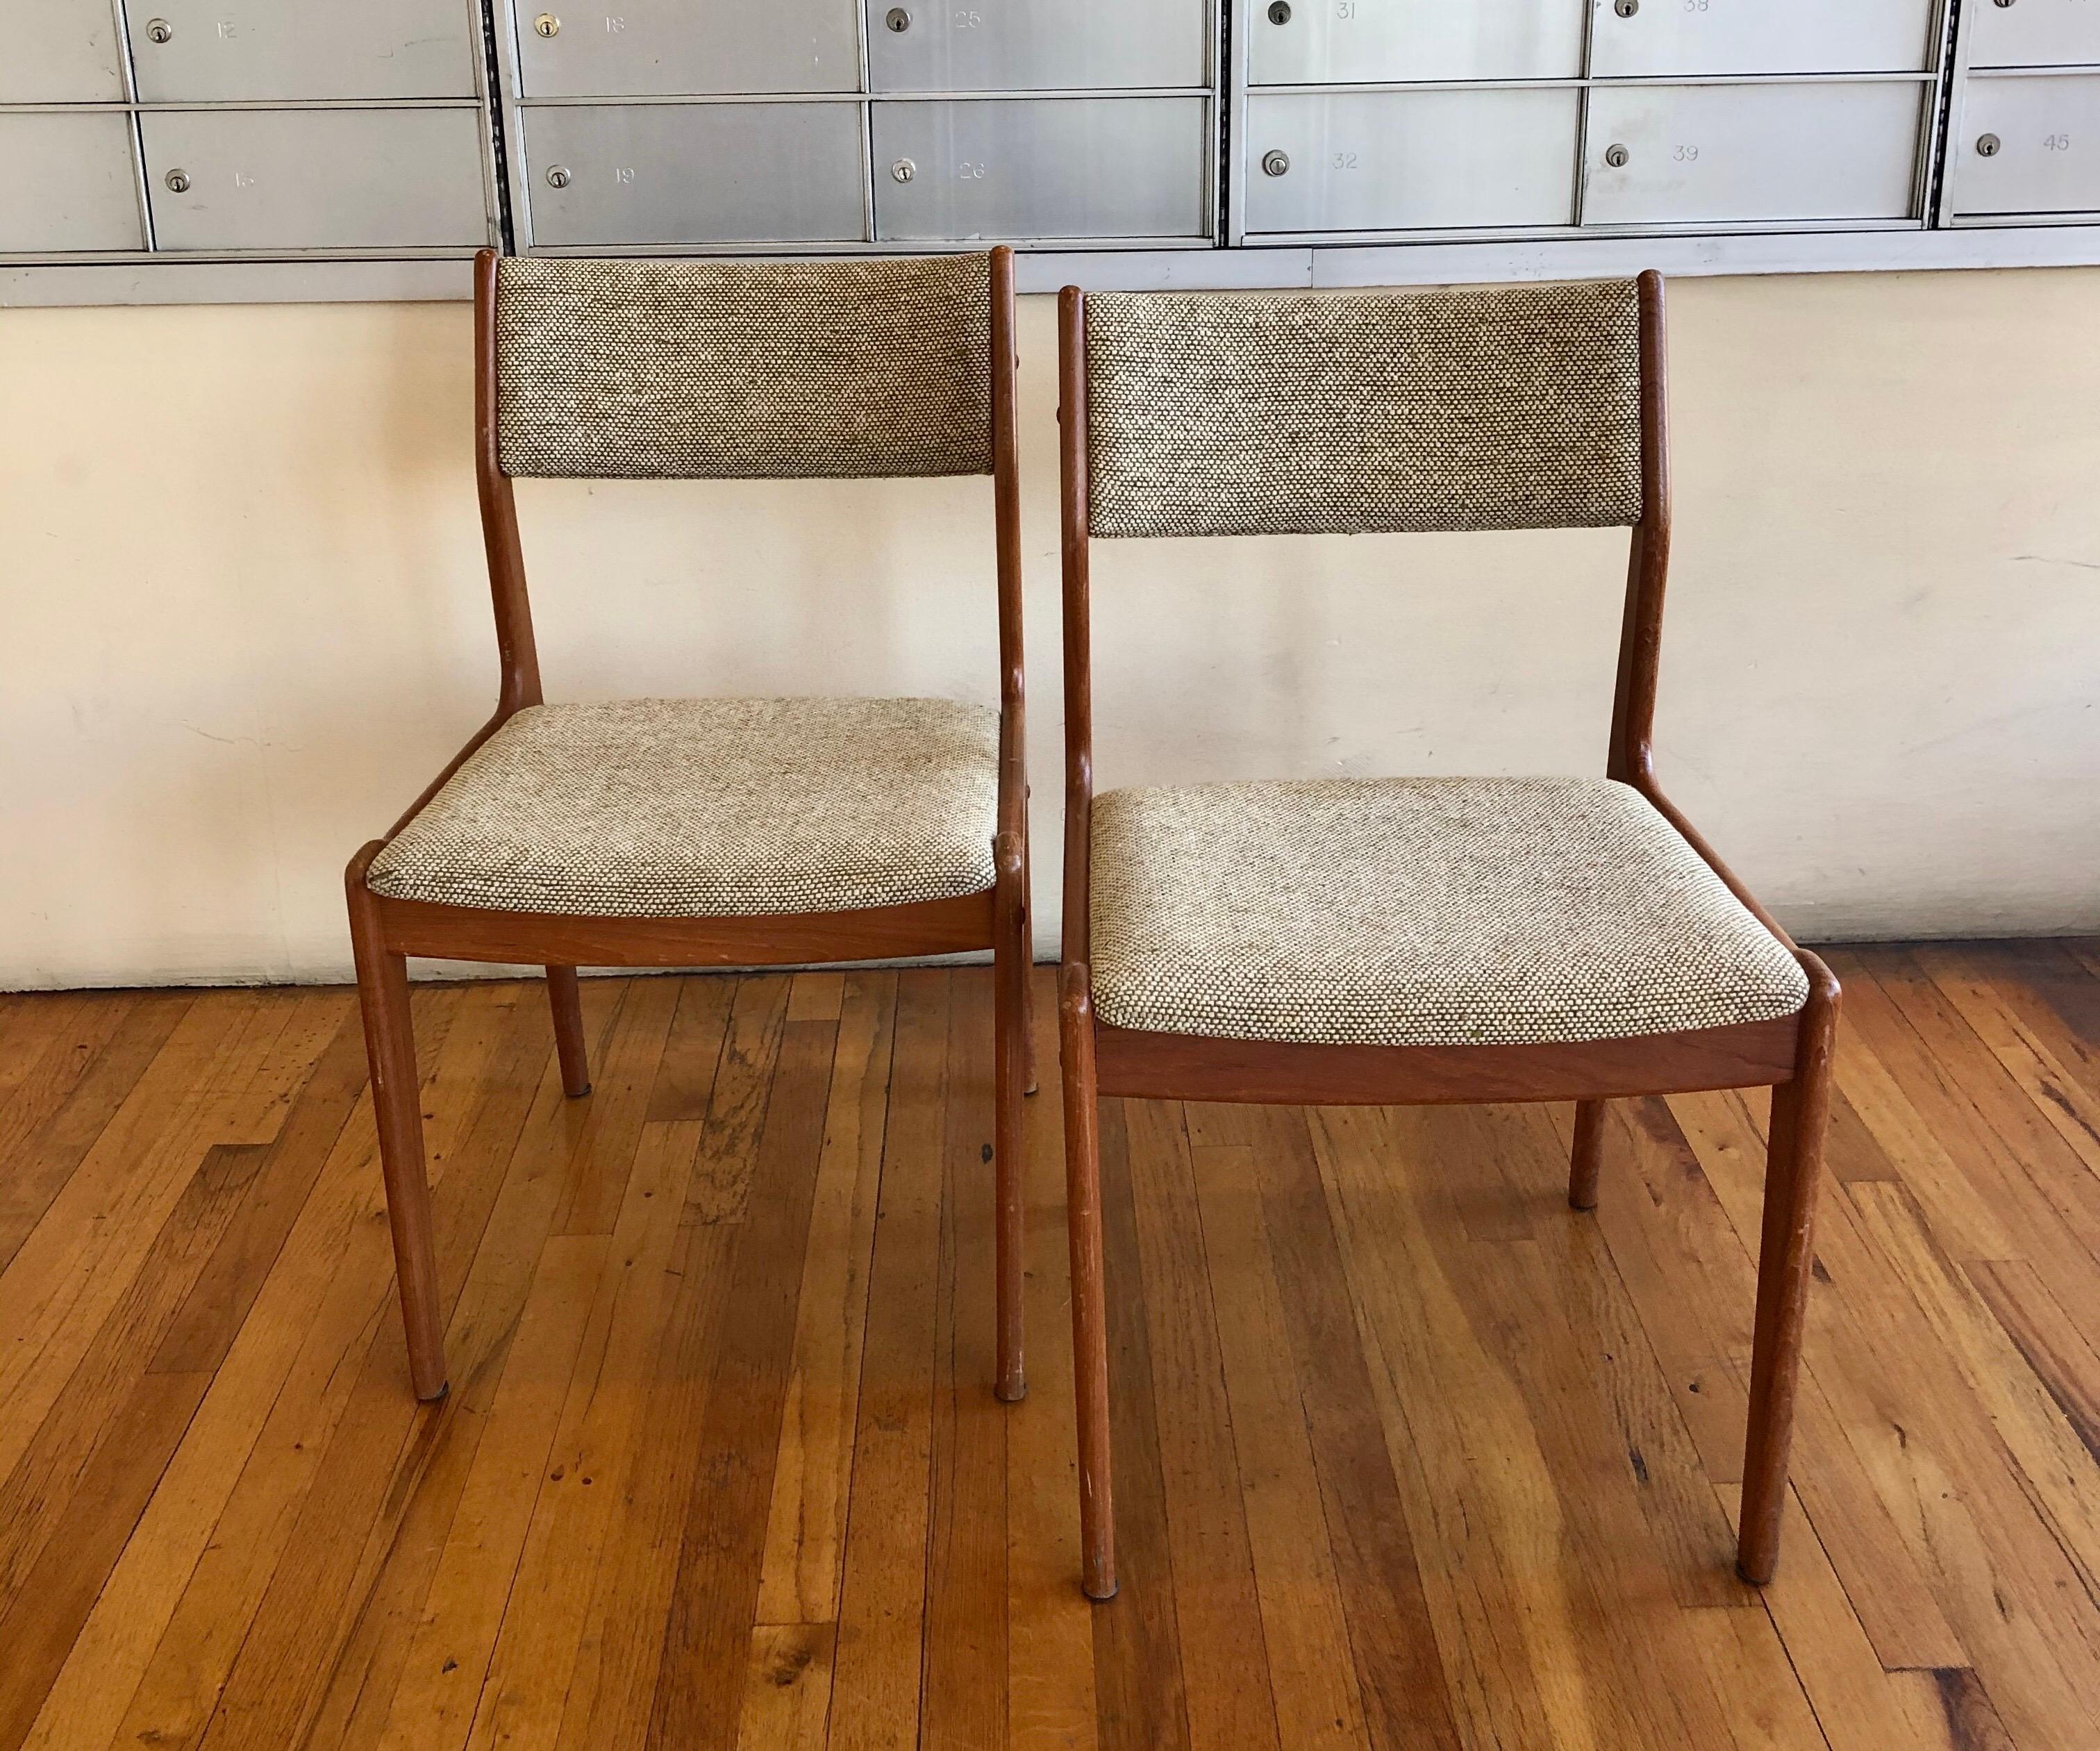 Nice pair of solid teak dining chairs original upholstery seats, in oatmeal color. Made in Denmark, circa 1960s.